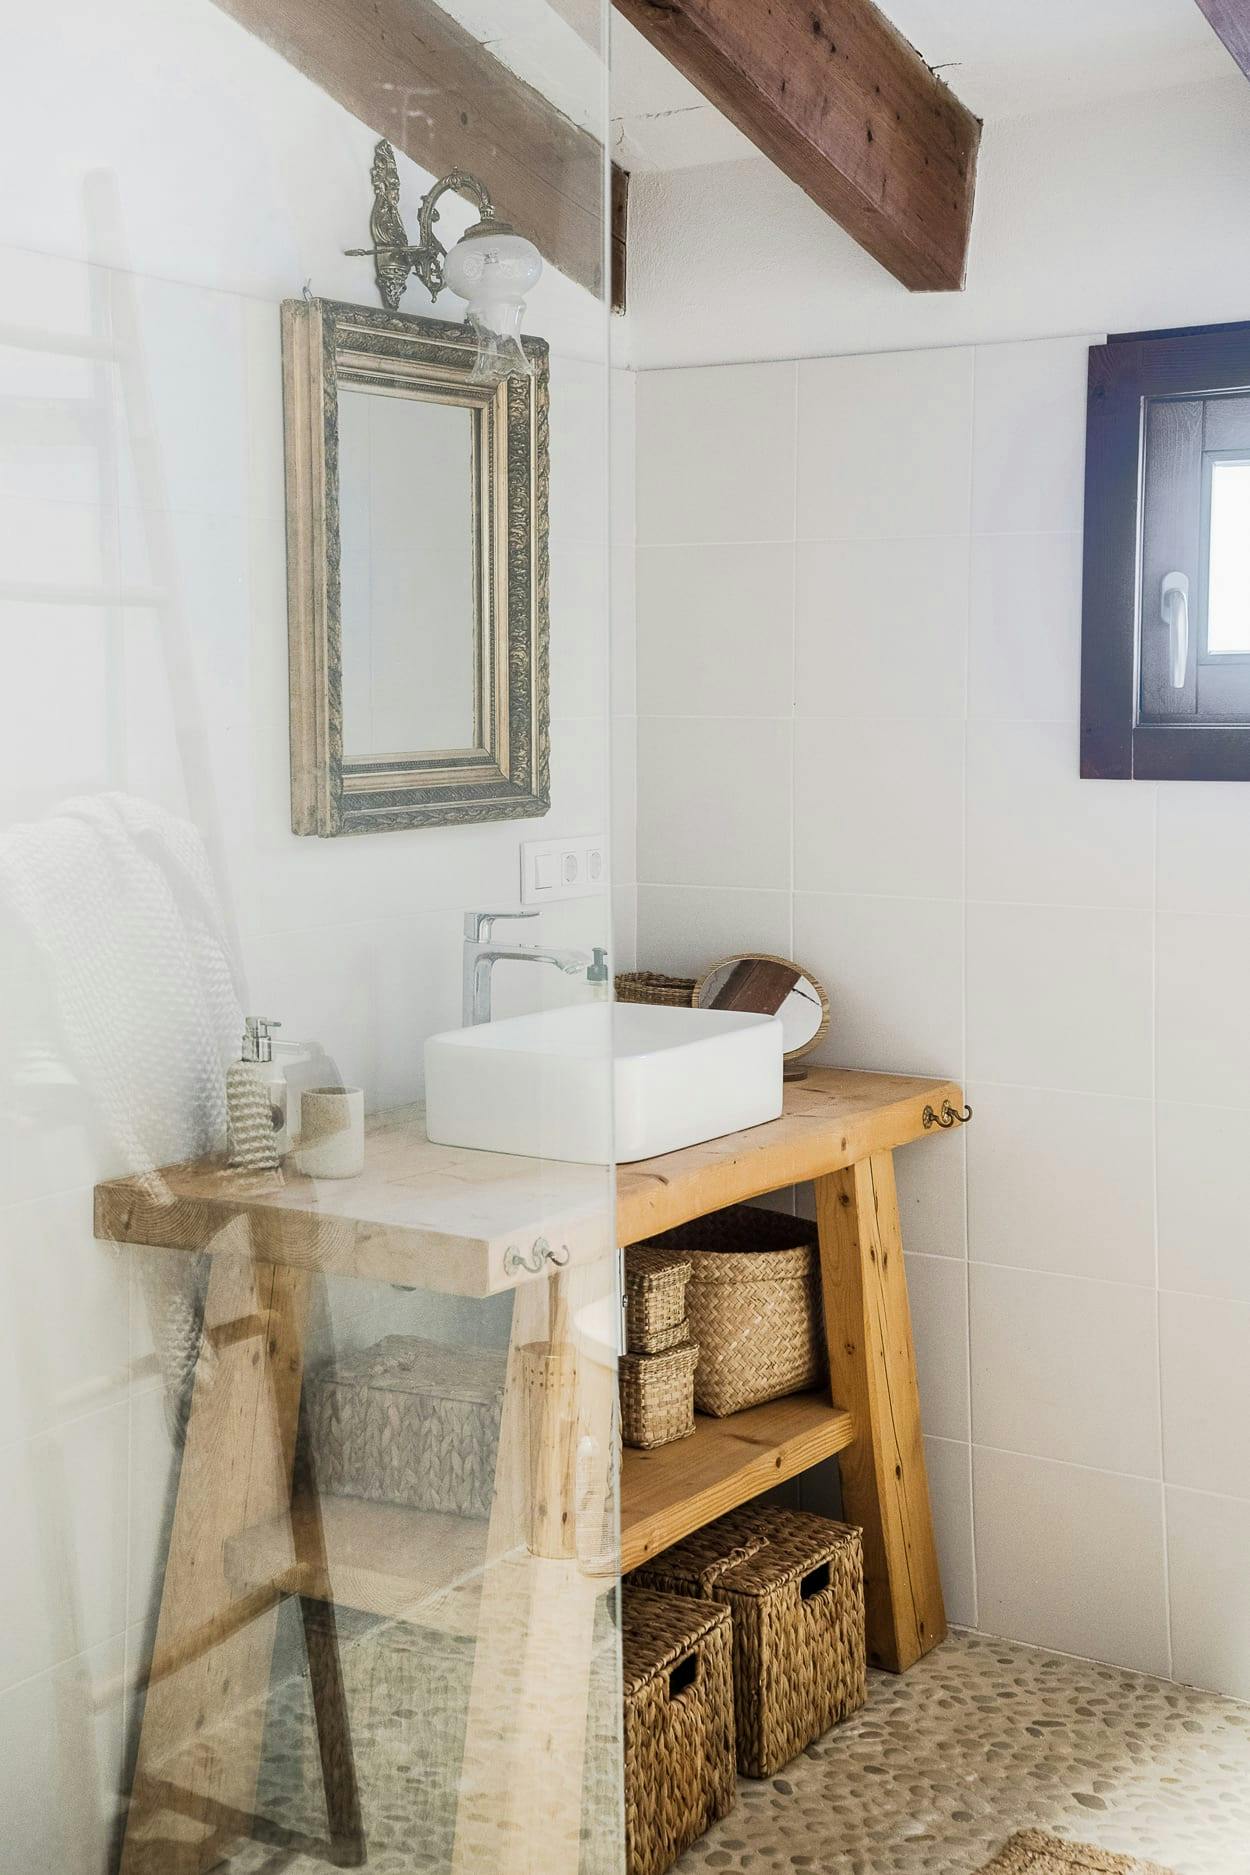 The image features a small bathroom with a white sink, a mirror, a wooden vanity, and a wooden stool.